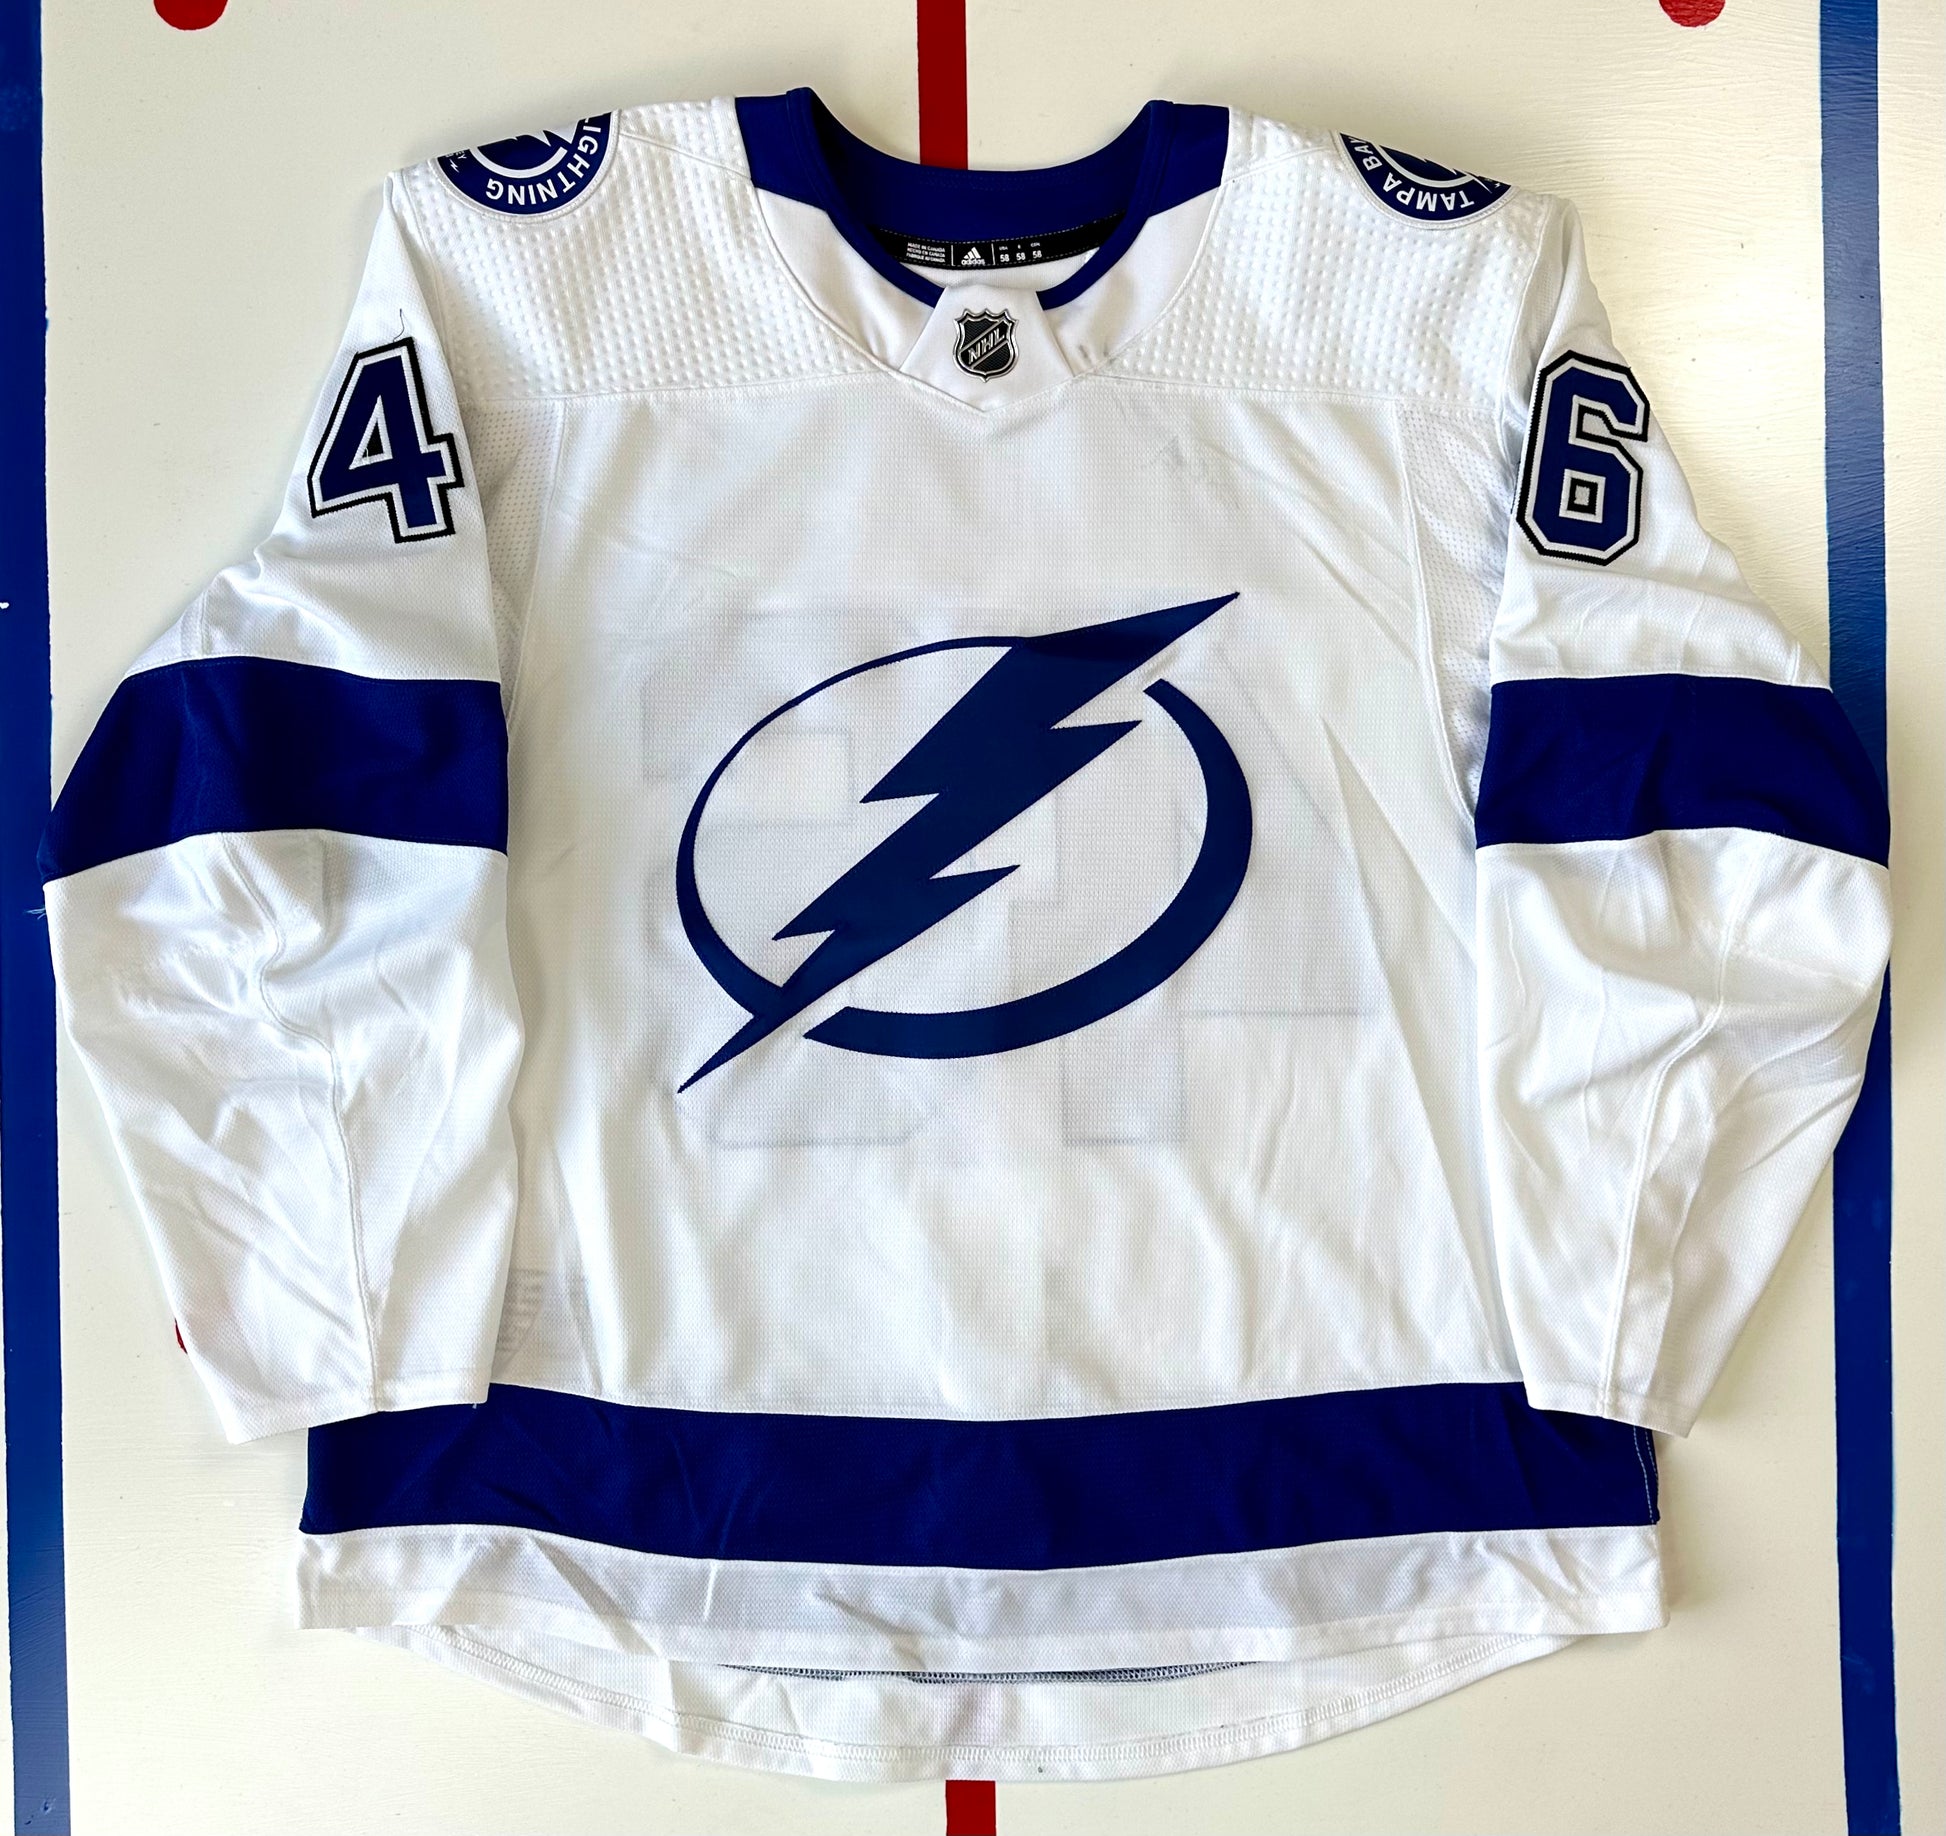 Tampa Bay Lightning Game Used NHL Jerseys for sale